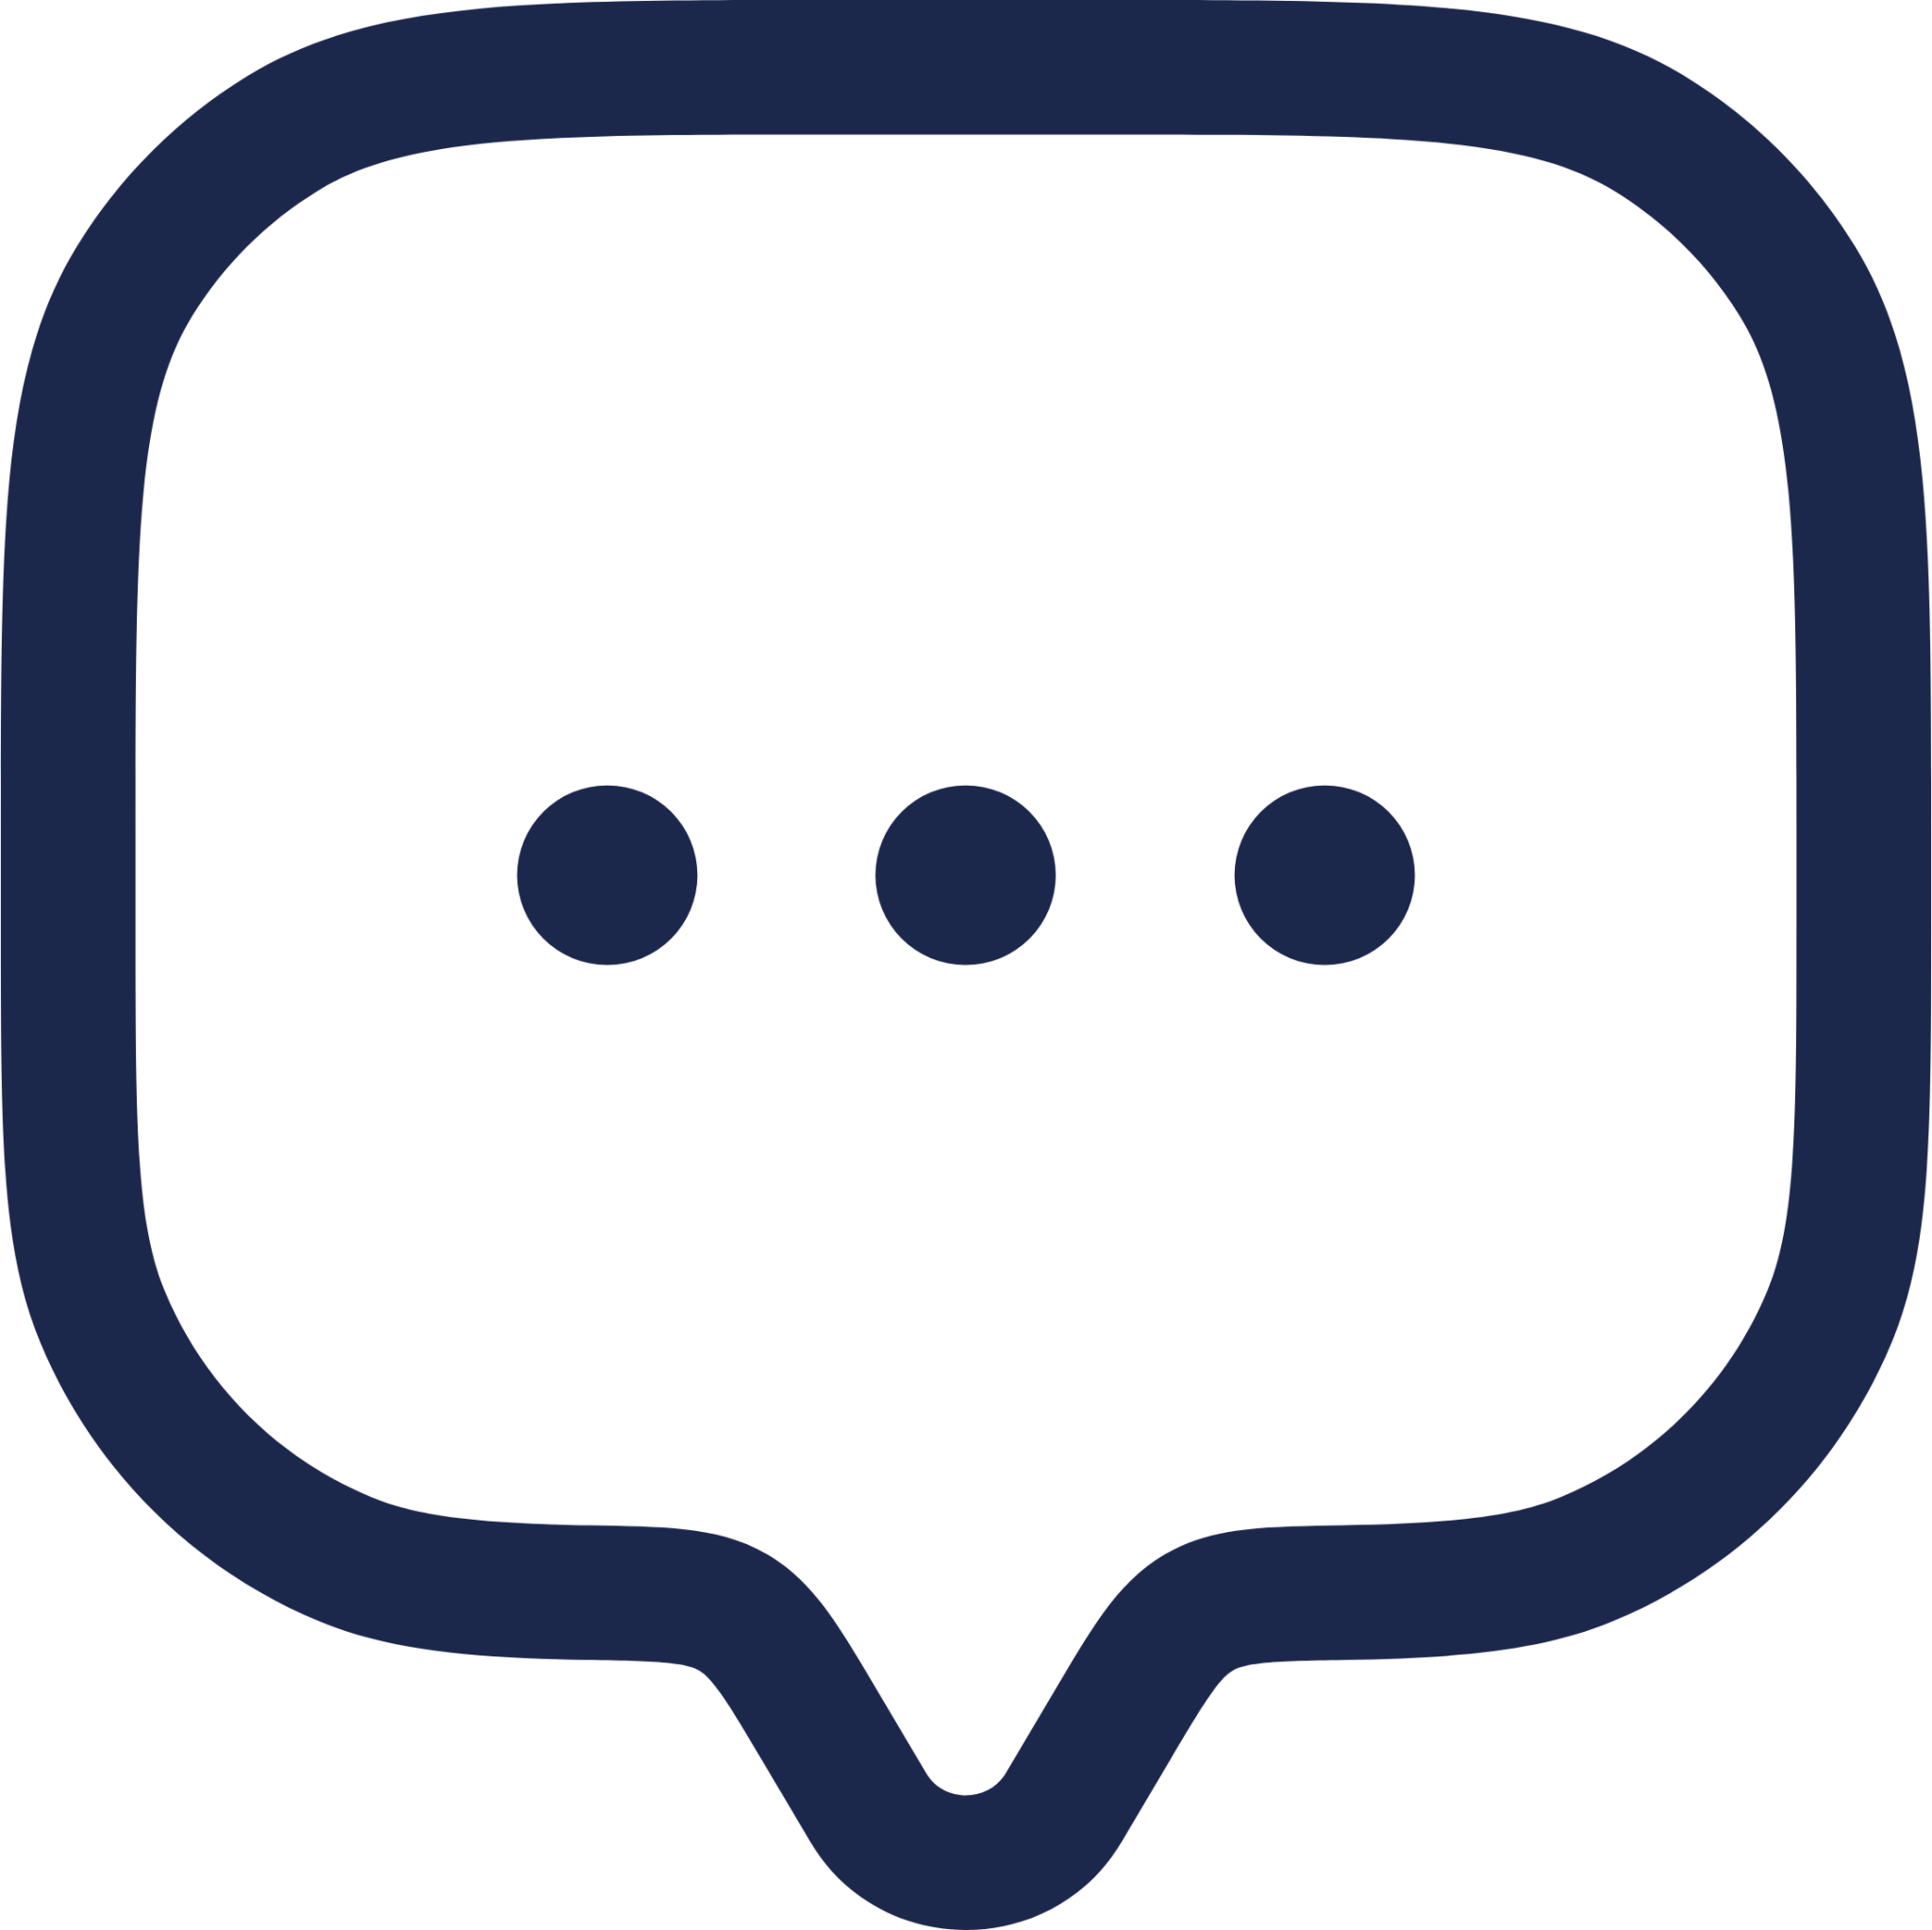 Chat Dots icon